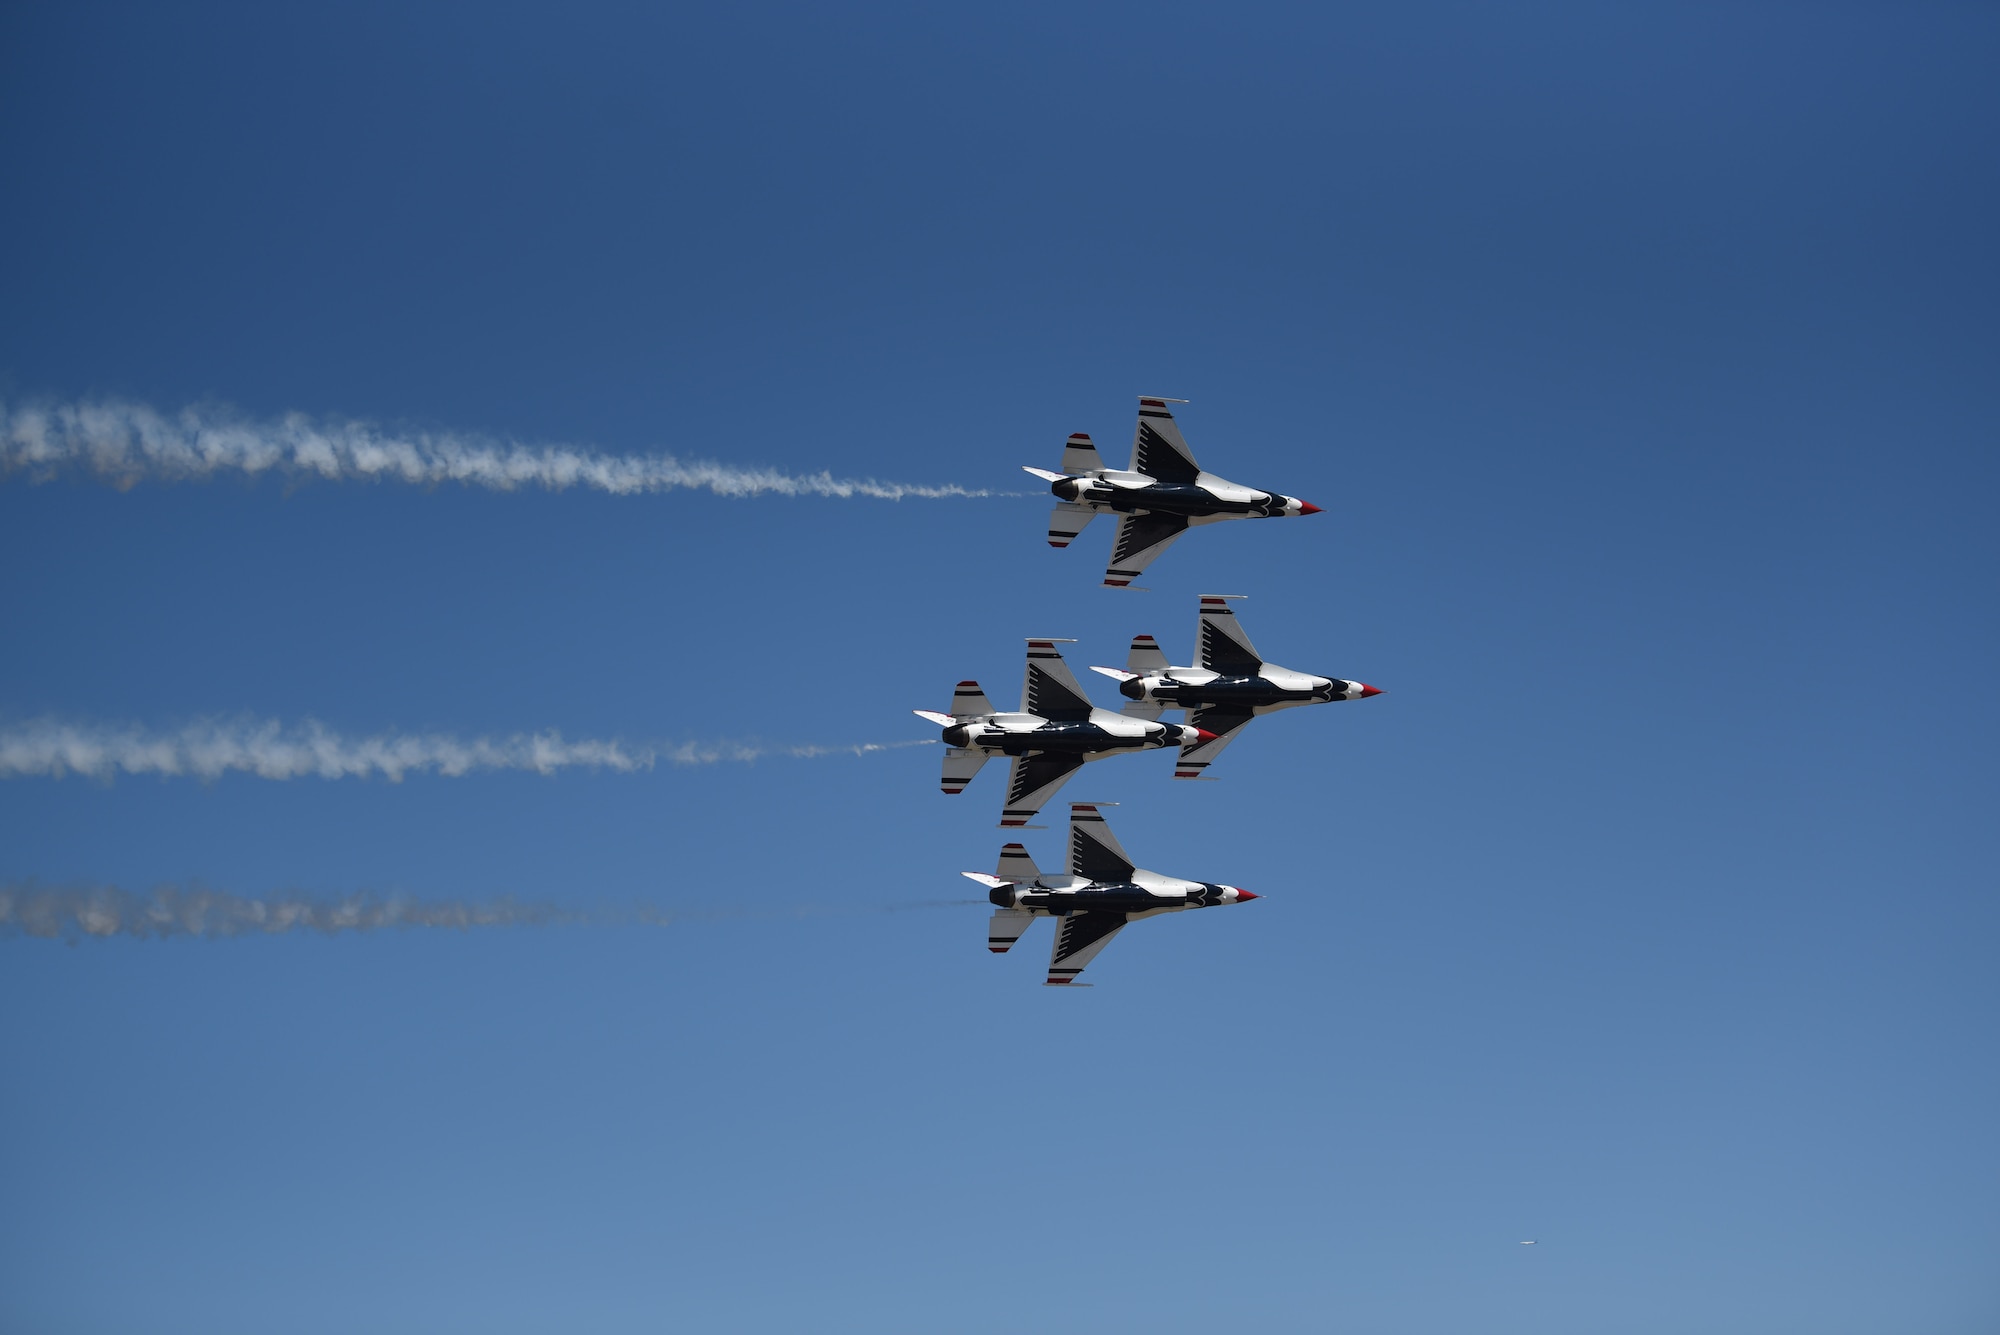 The U.S. Air Force Air Demonstration Squadron “Thunderbirds” #1-4 fly F-16 Fighting Falcons above the McChord Field flightline during their rehearsal for the Joint Base Lewis-McChord Airshow and Warrior Expo at JBLM, Washington, July 14, 2023. The mission of the JAWE is to foster goodwill to educate and familiarize attendees with the people, mission, and equipment of the Air Force, Army, and other Armed Services while continuing to provide installation-wide mission support. The Thunderbirds are one of the JAWE’s premier acts and will be joined by aerial demonstrations from the C-17 West Coast Demonstration Team, Tora! Tora! Tora! and many more. (U.S. Air Force photo by Airman 1st Class Kylee Tyus)